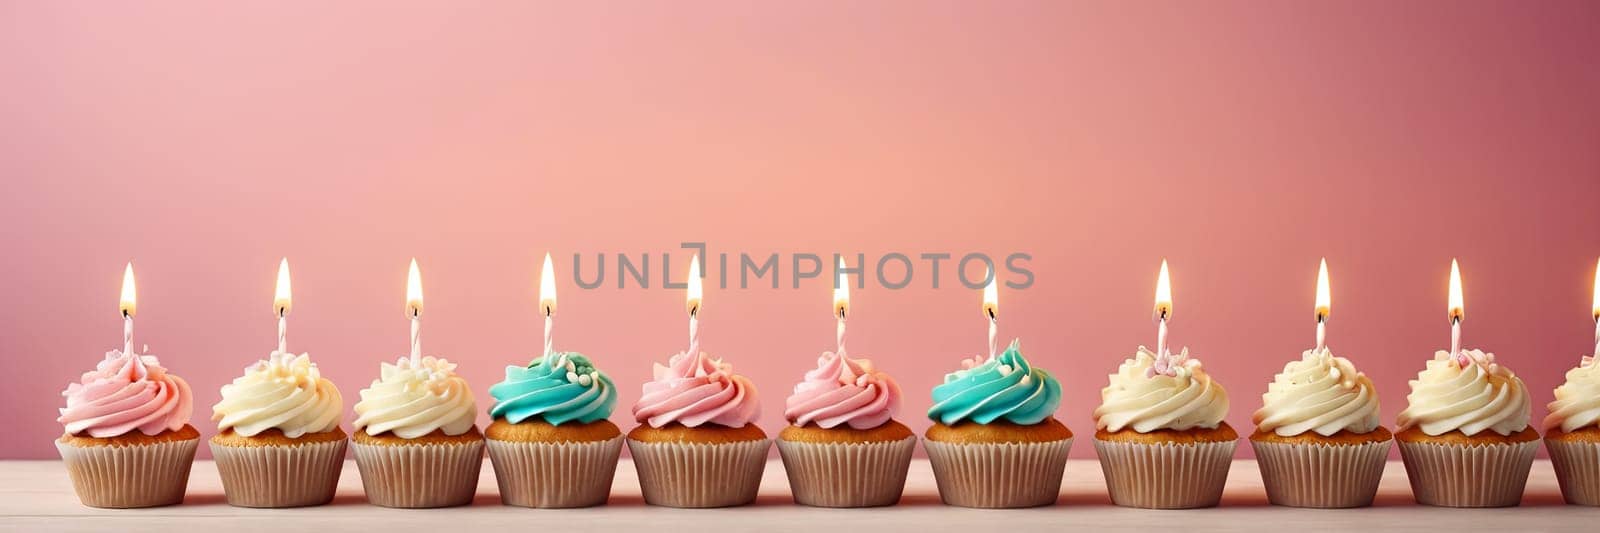 Colorful cupcakes with lit candles are displayed against a pink background, indicating an indoor celebration event marking of joy and celebrating. banner with free space.